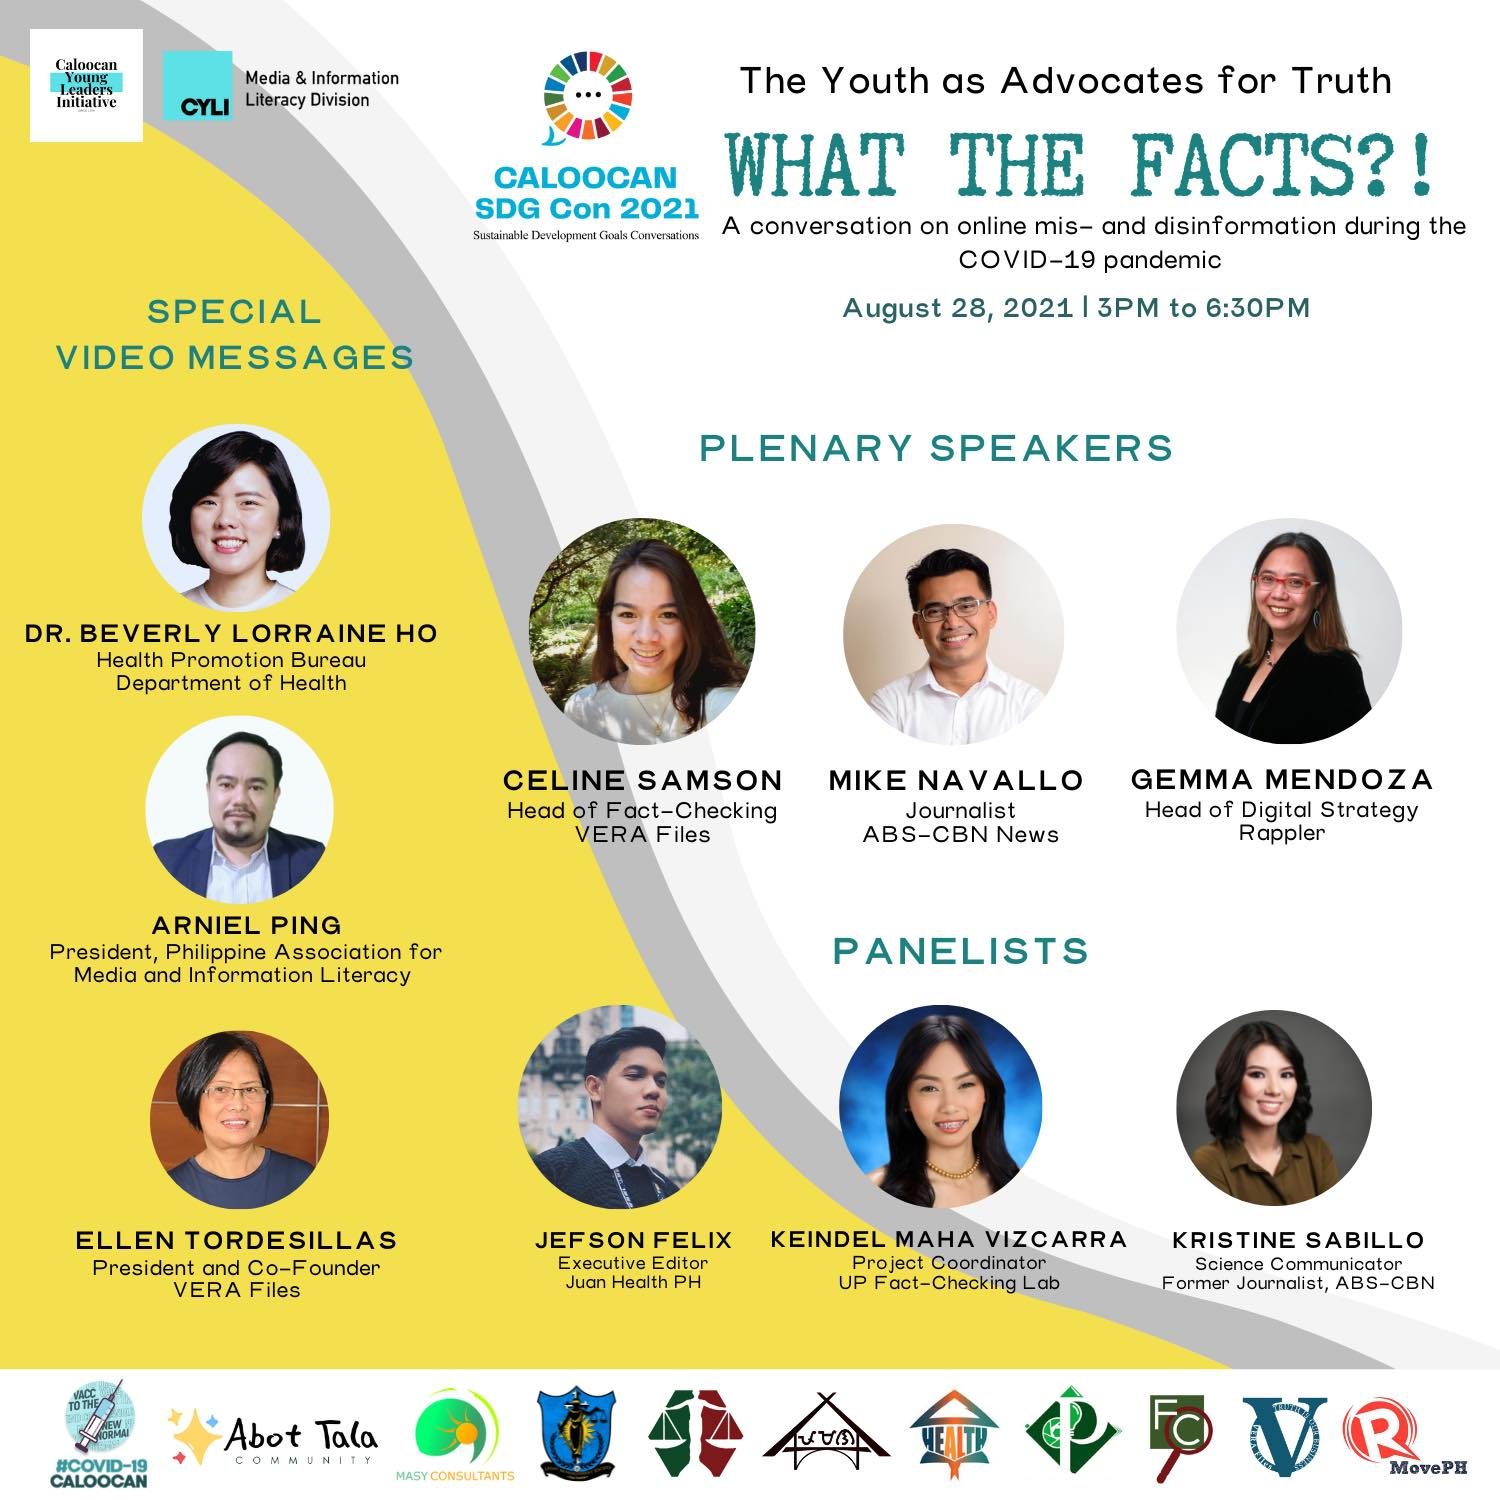 Caloocan youth group to host conversation on COVID-19 ‘infodemic’